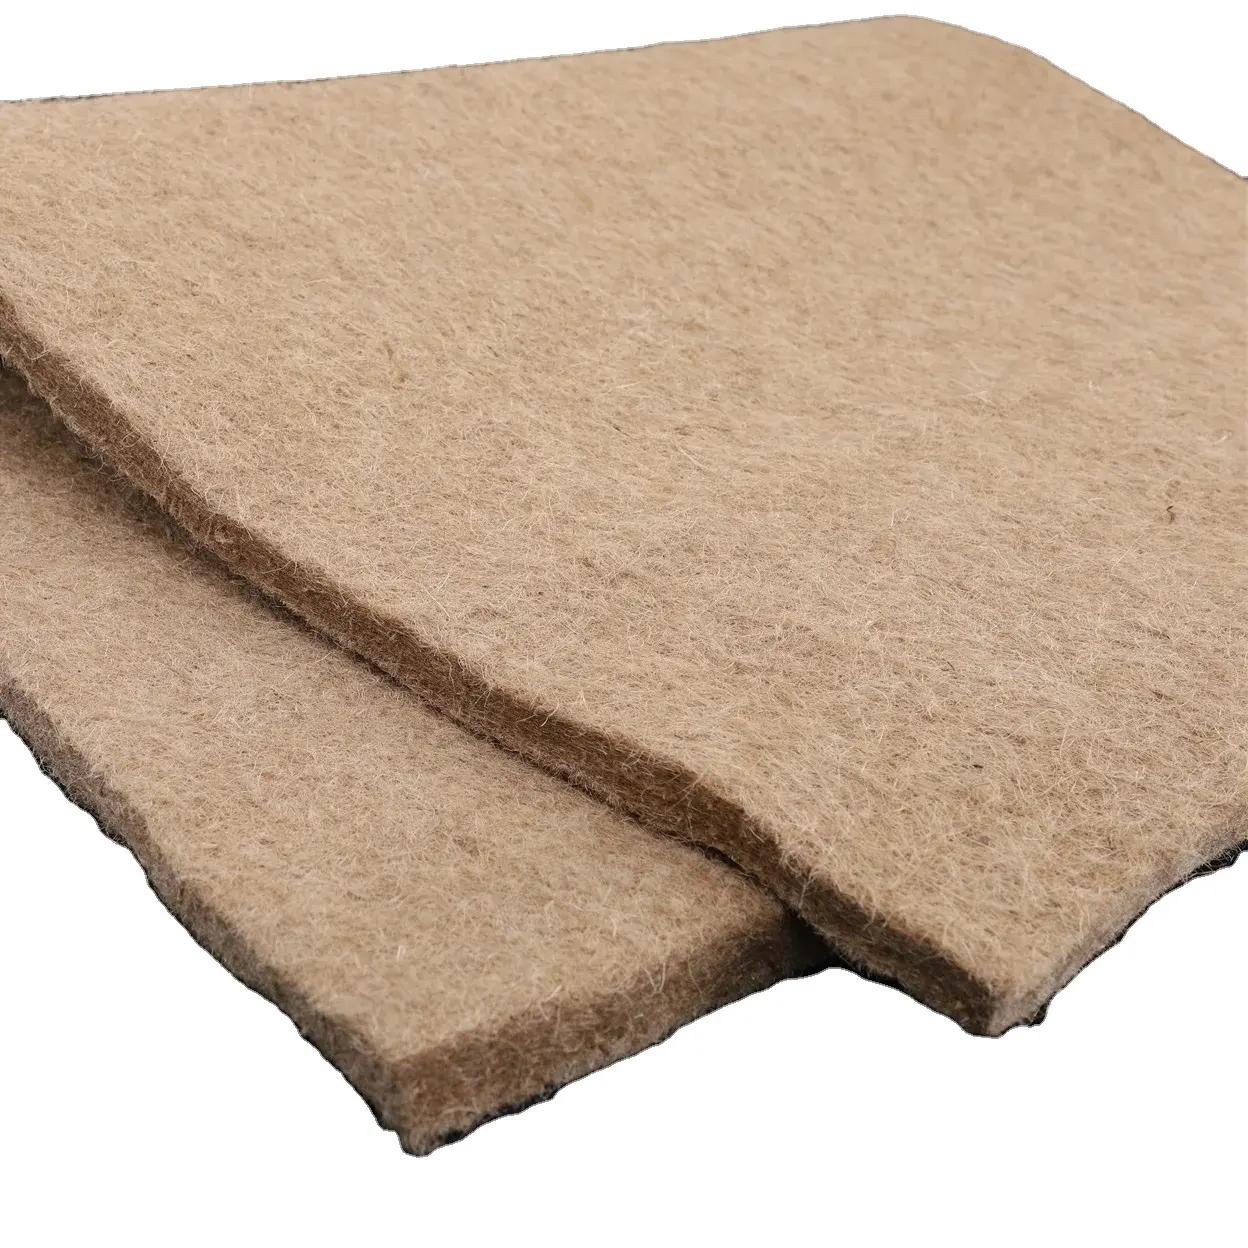 Biodegradable Disposable Bottom/Bedding/Liner for Guinea Pig Cages,Cage Liners for Guinea Pigs,Guinea Pig Mats,Birds Bedding